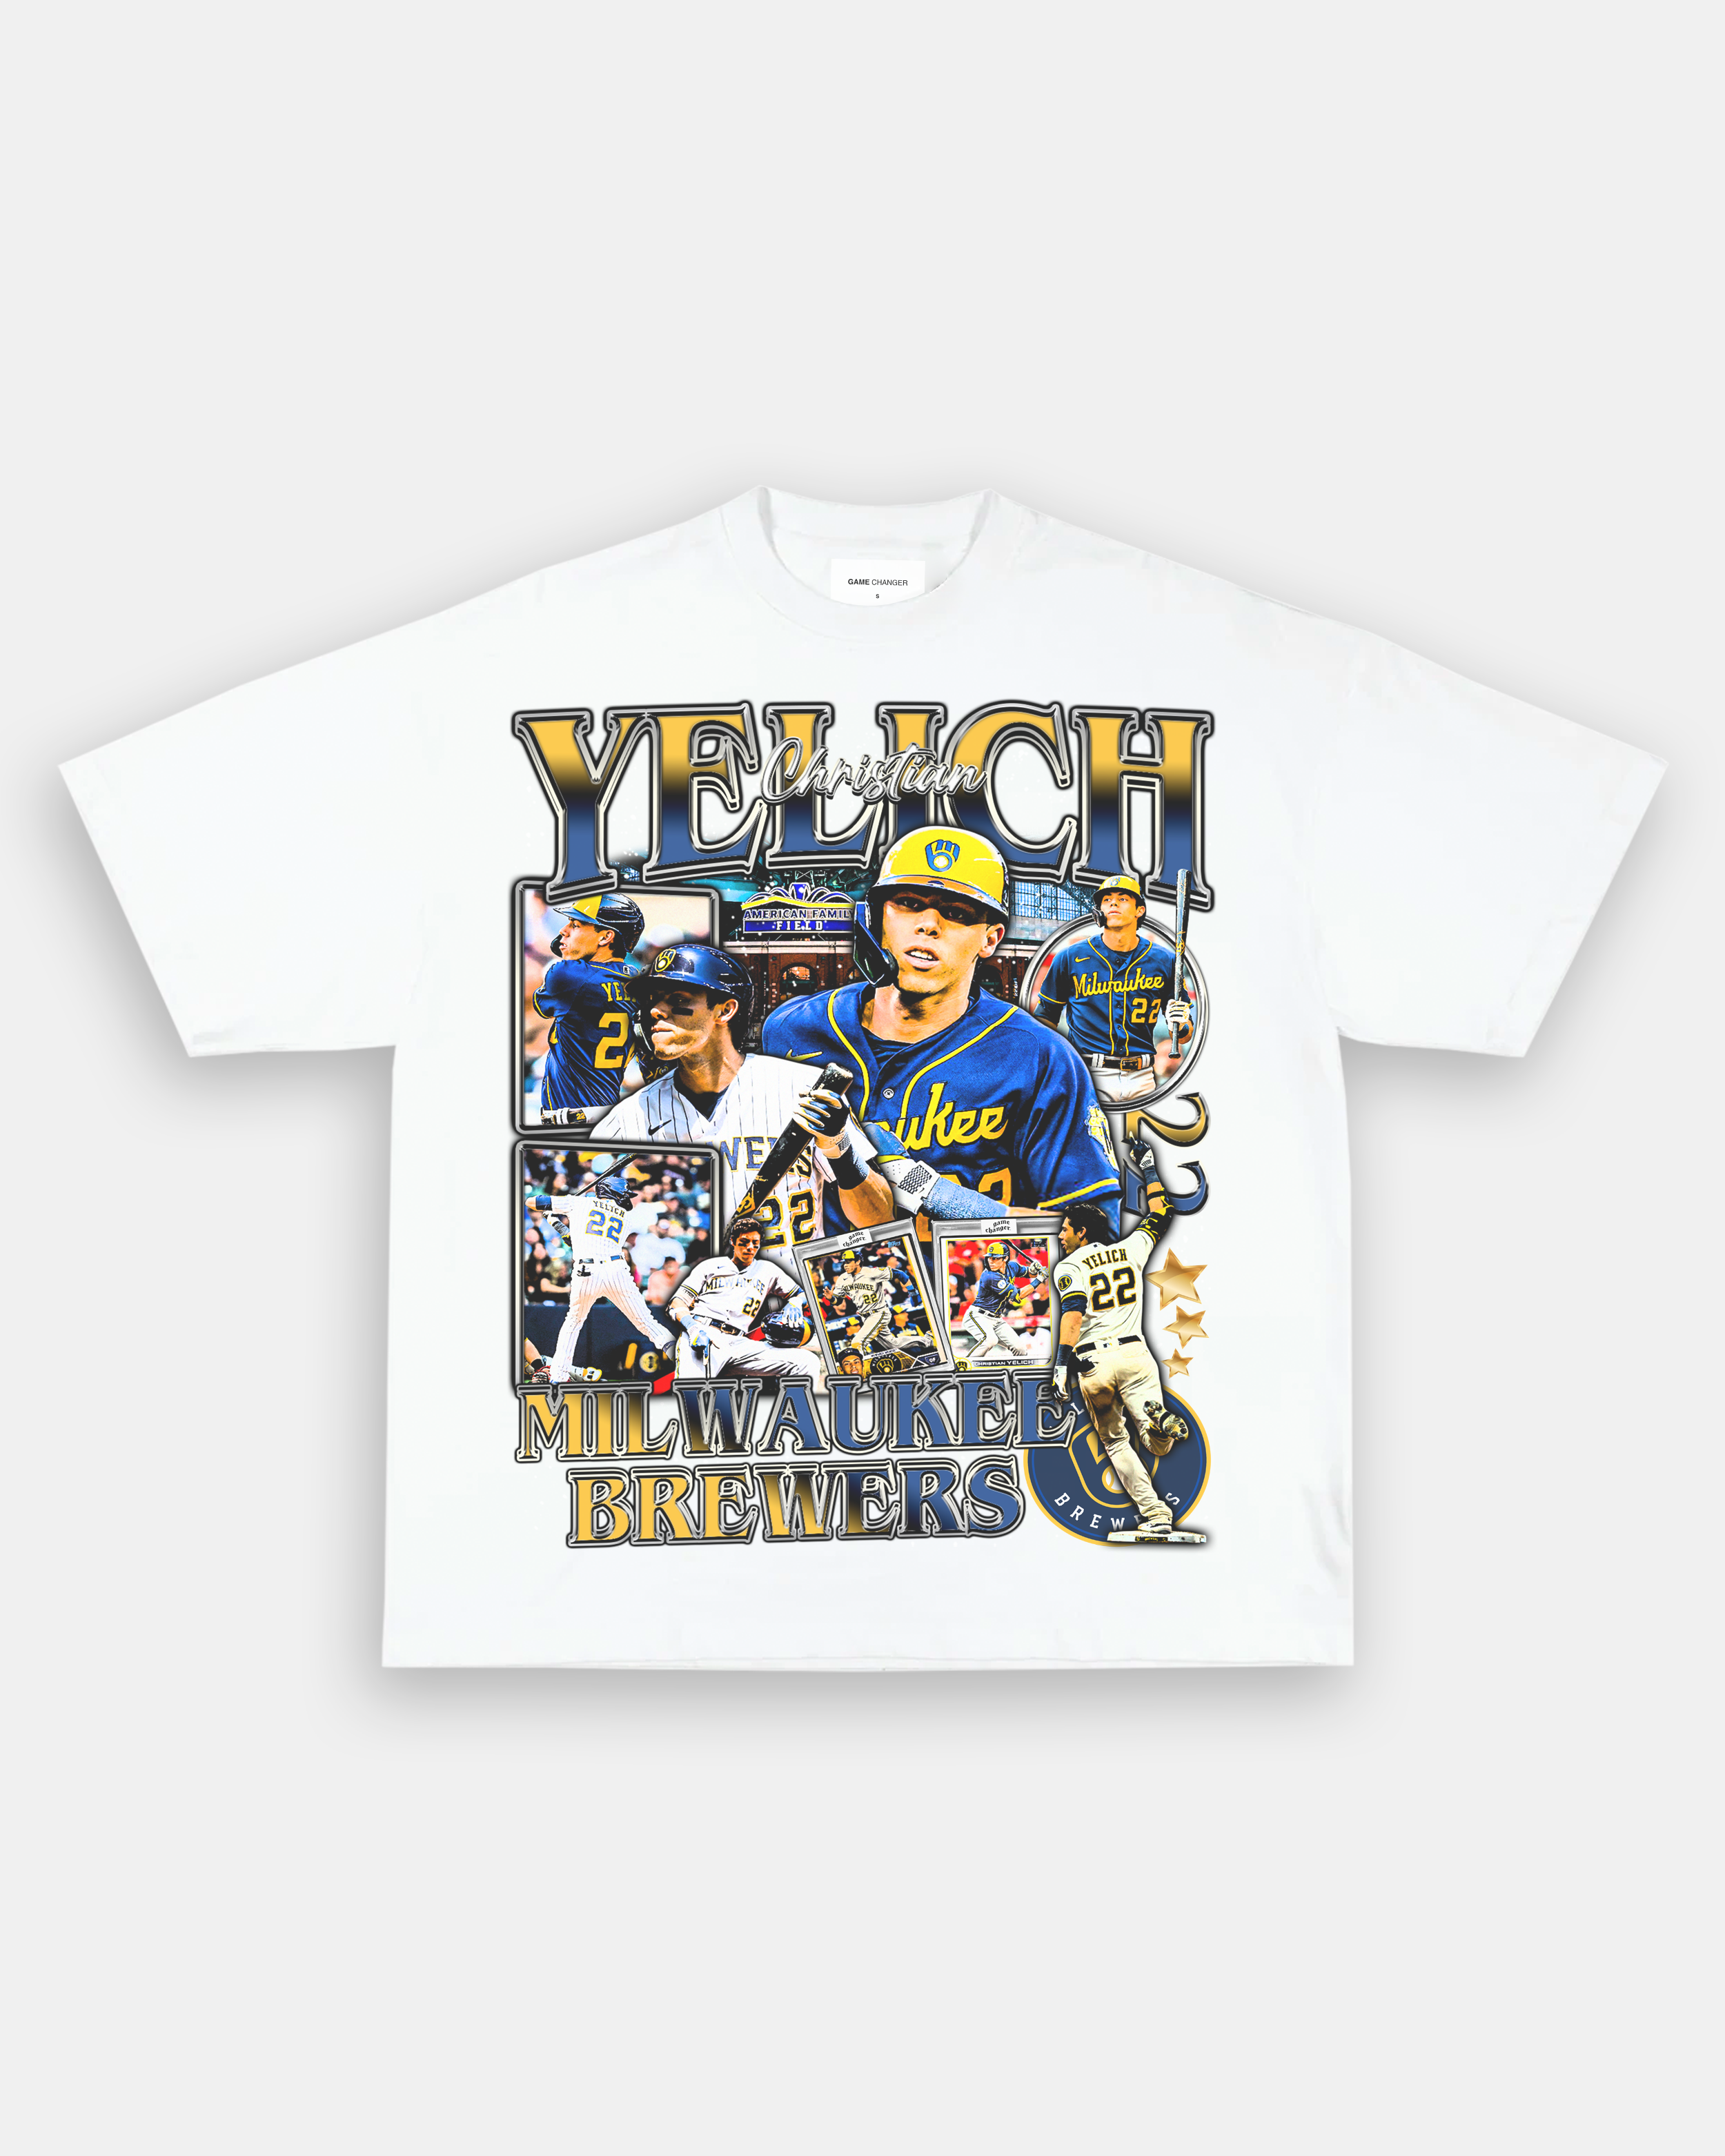 Christian Yelich T-Shirts for Sale